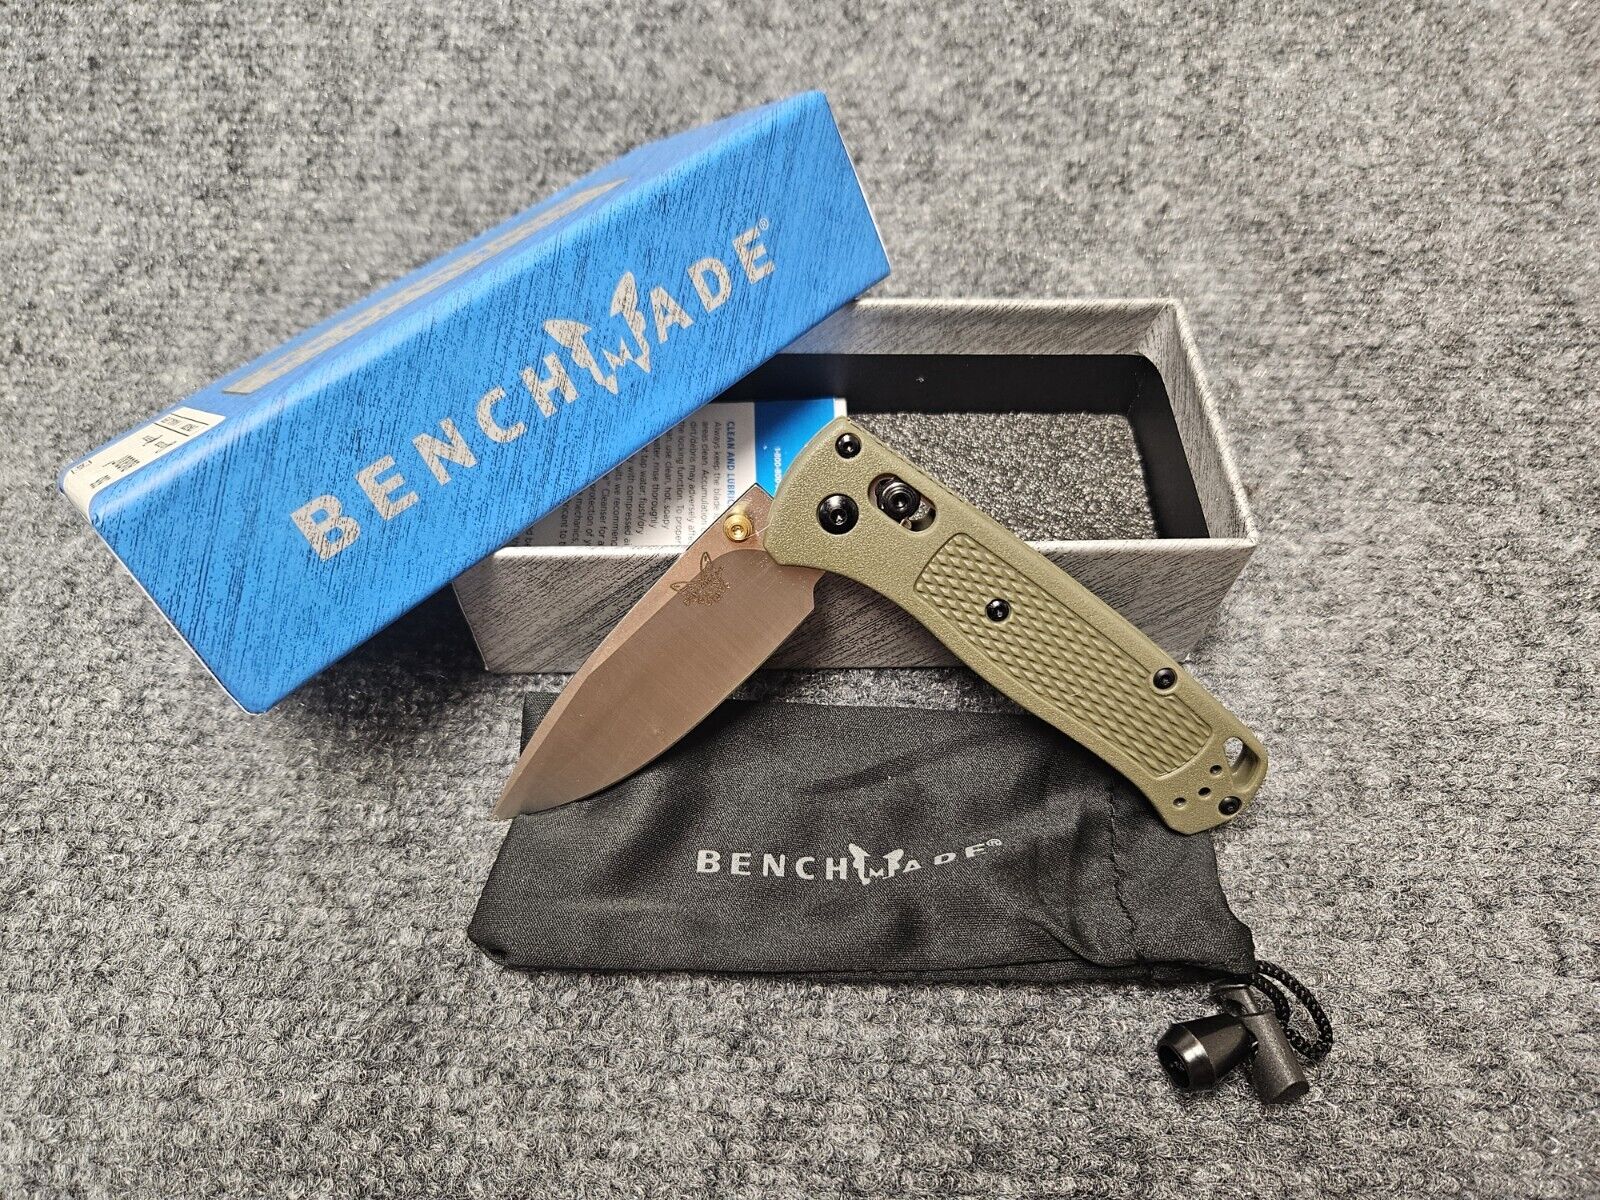 *Benchmade Bugout 535 CPM-S30V Stainless Steel Folding Knife- green Grivory